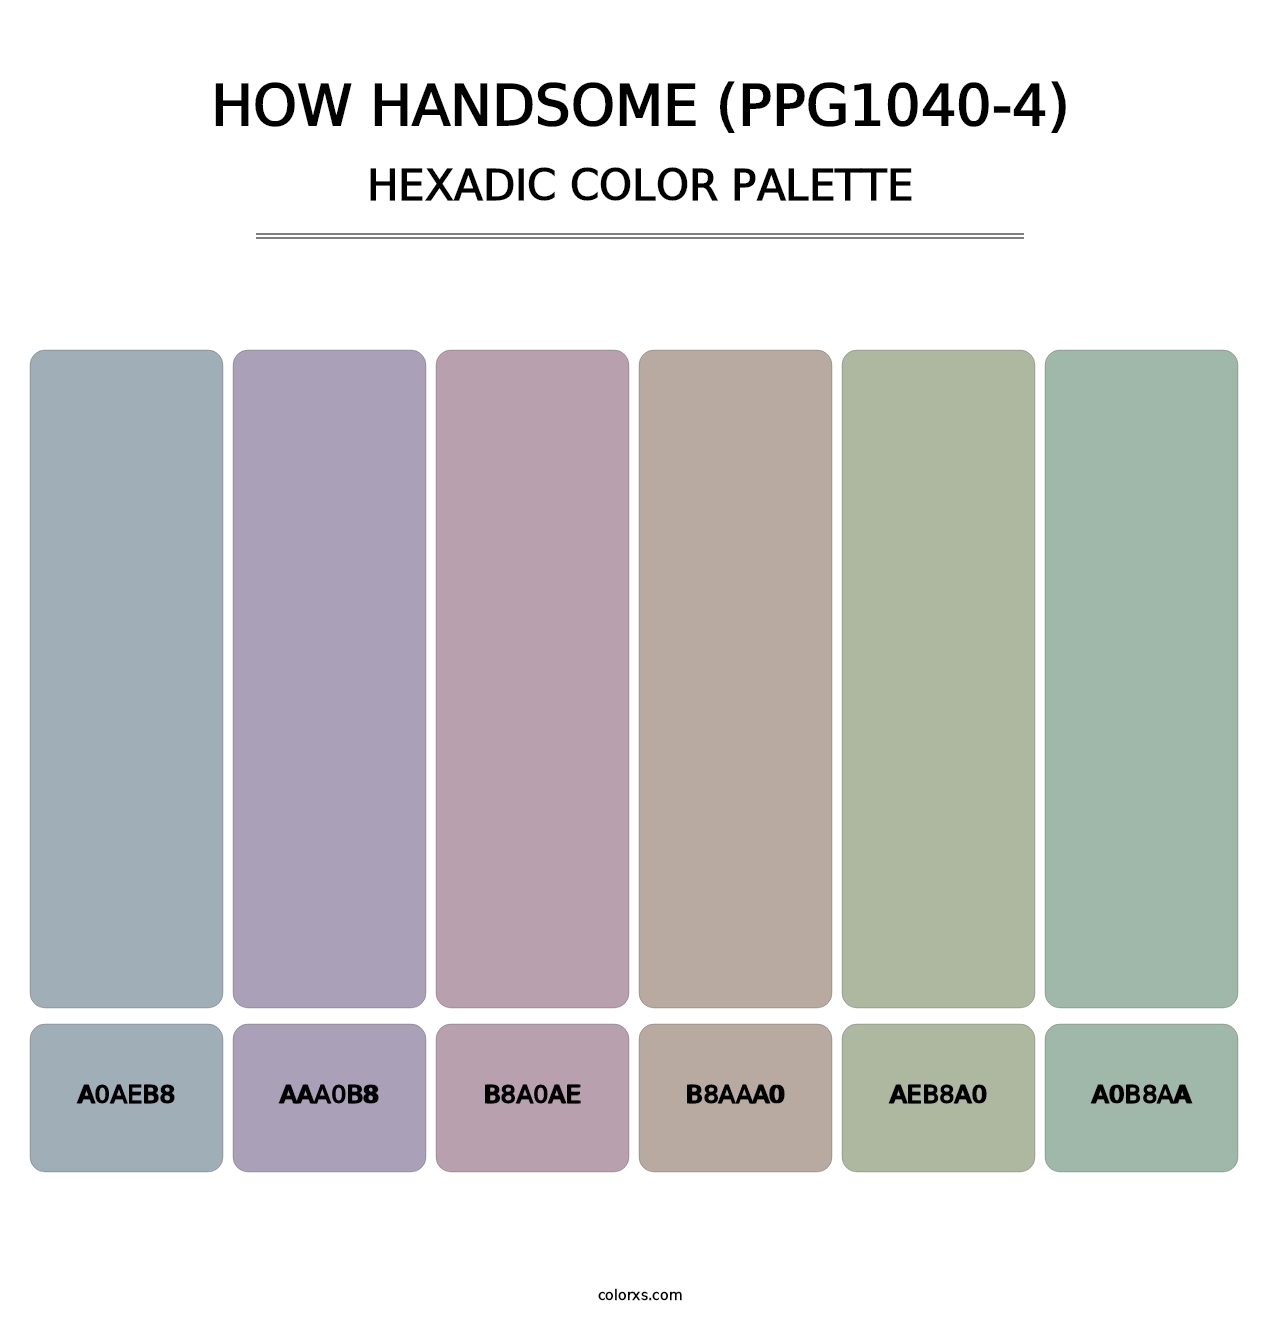 How Handsome (PPG1040-4) - Hexadic Color Palette